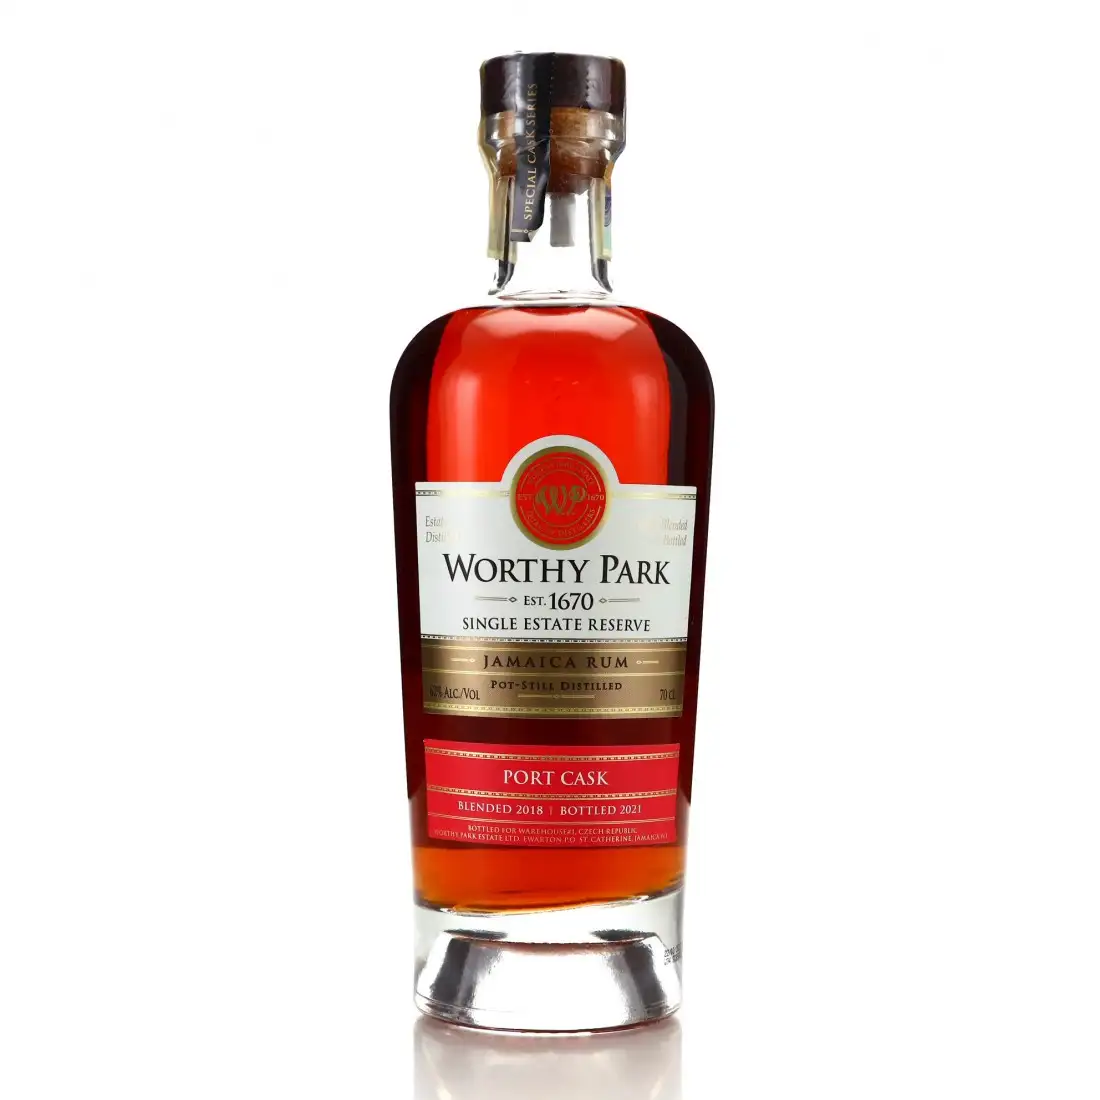 Image of the front of the bottle of the rum Single Estate Warehouse #1 Exclusive Port Cask Finish WPL